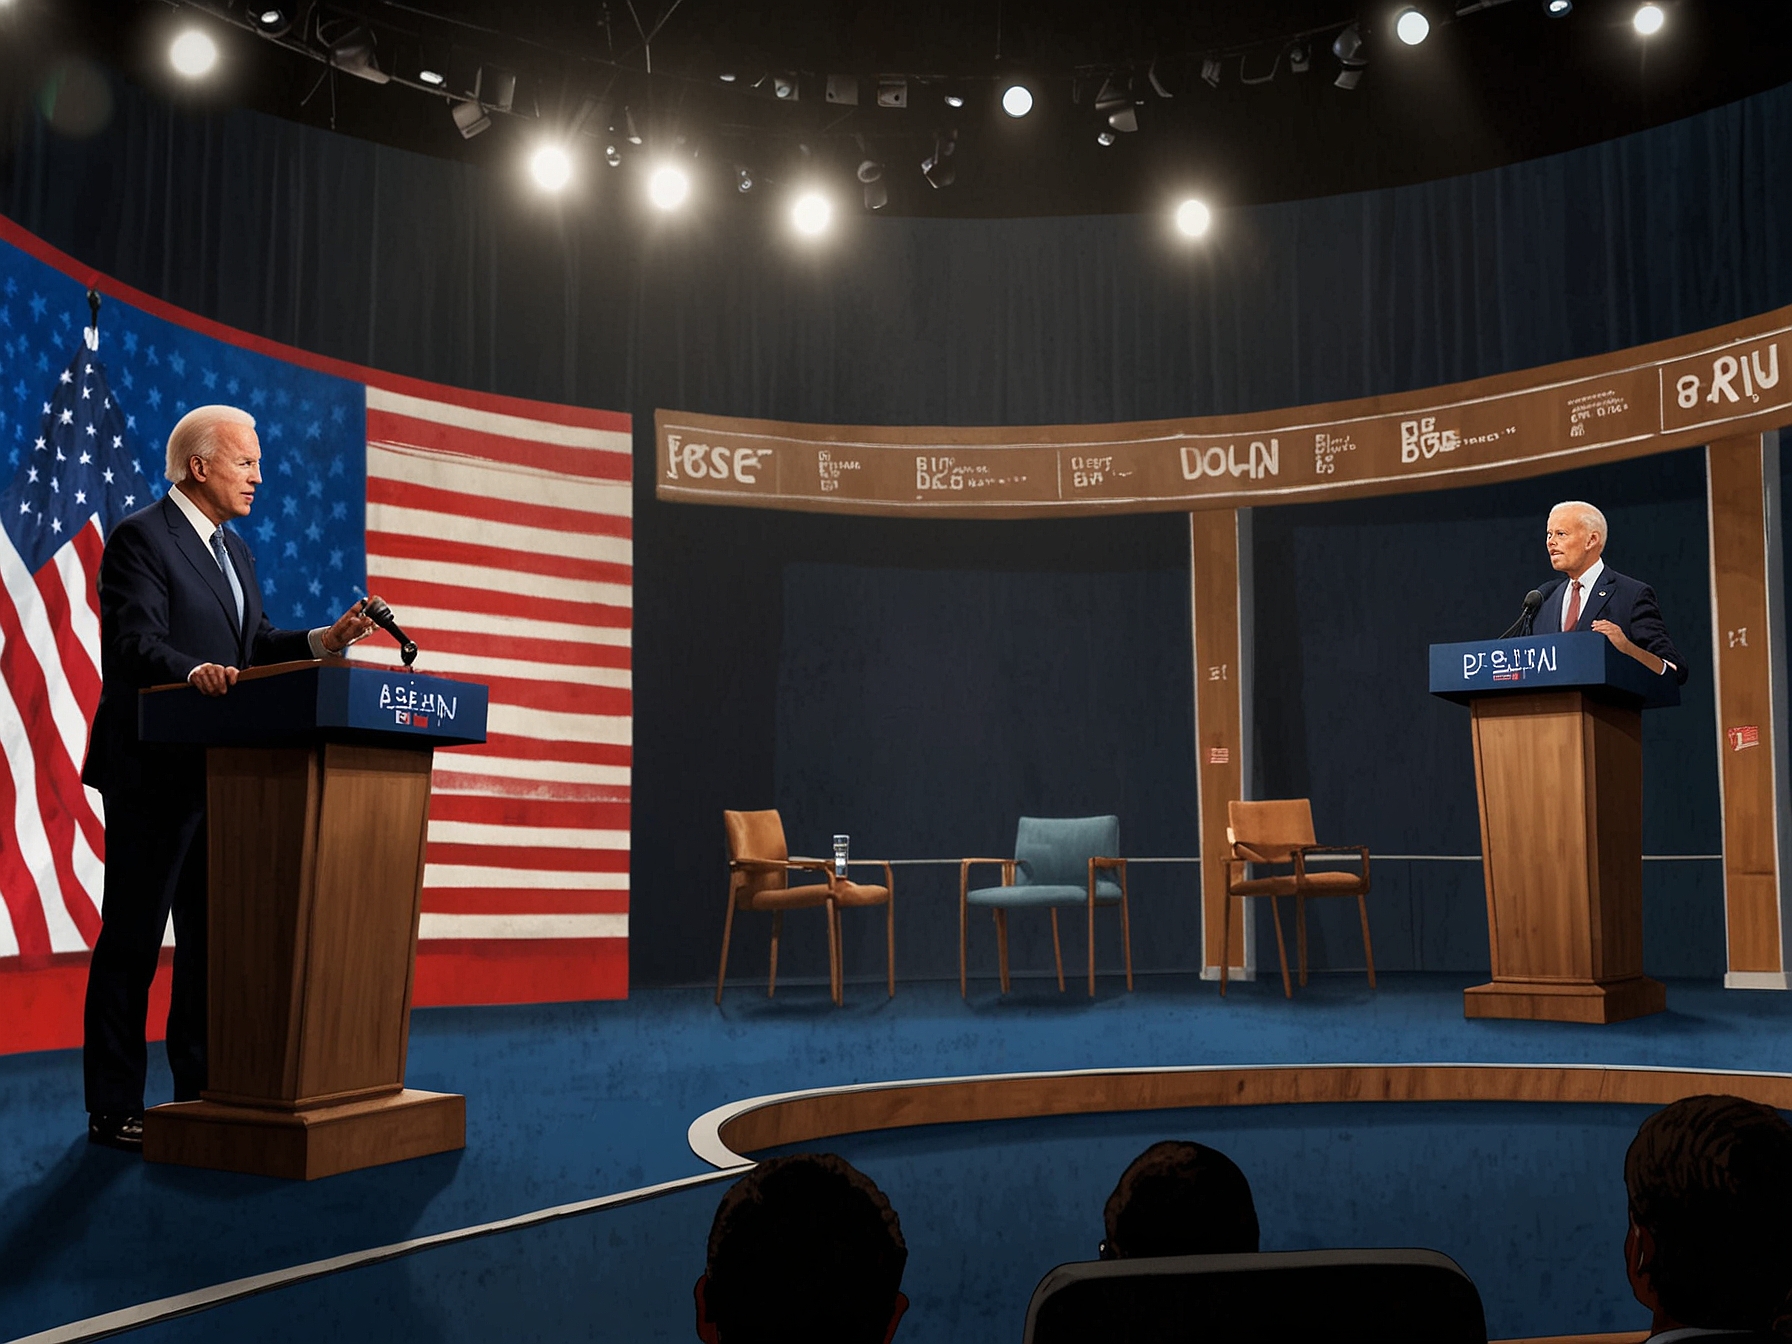 A political debate stage featuring President Joe Biden, with a focus on Biden receiving media training to improve his debate skills and public appearances for future engagements.